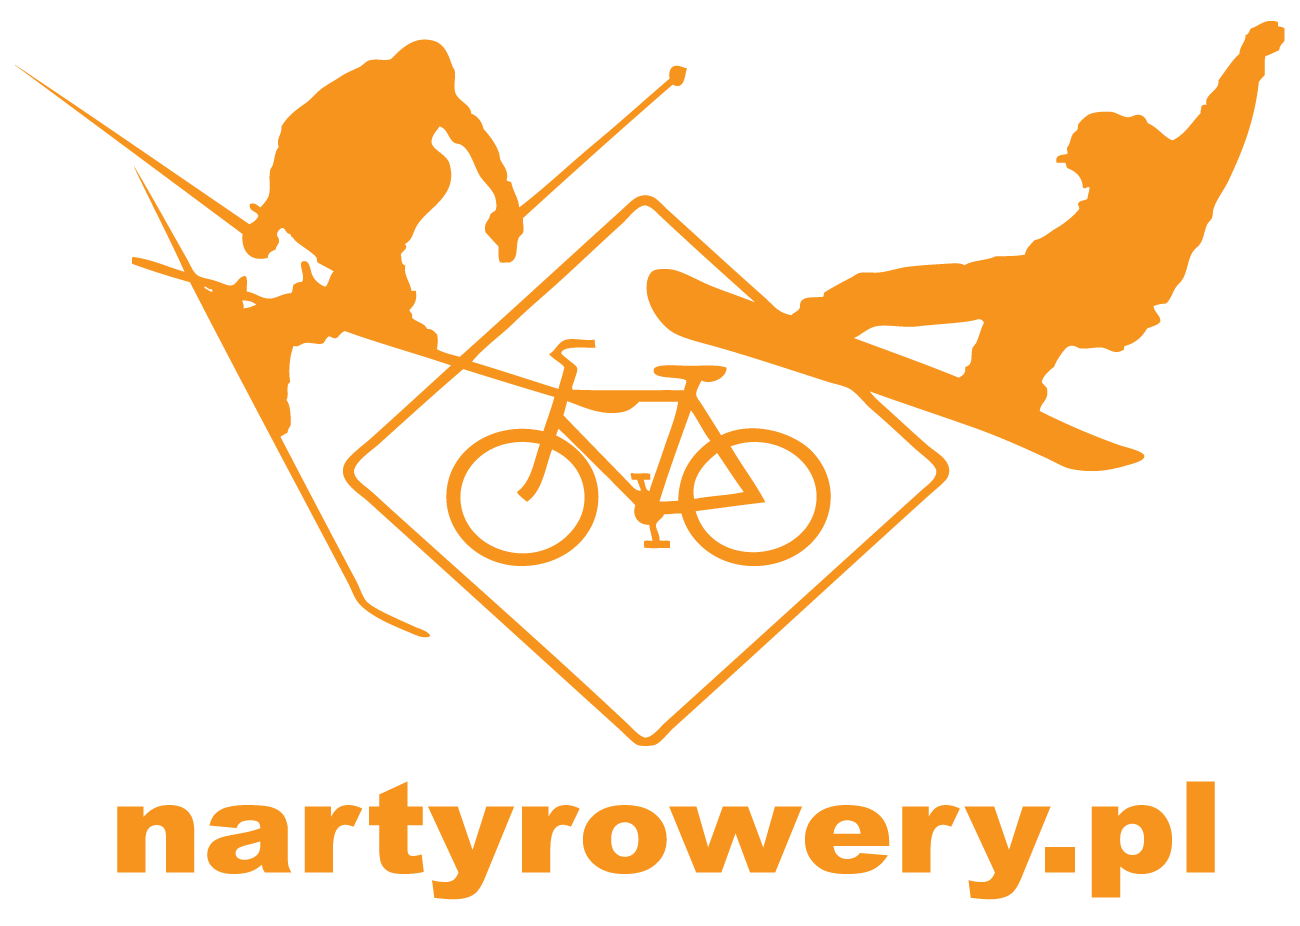 Nartyrowery.pl